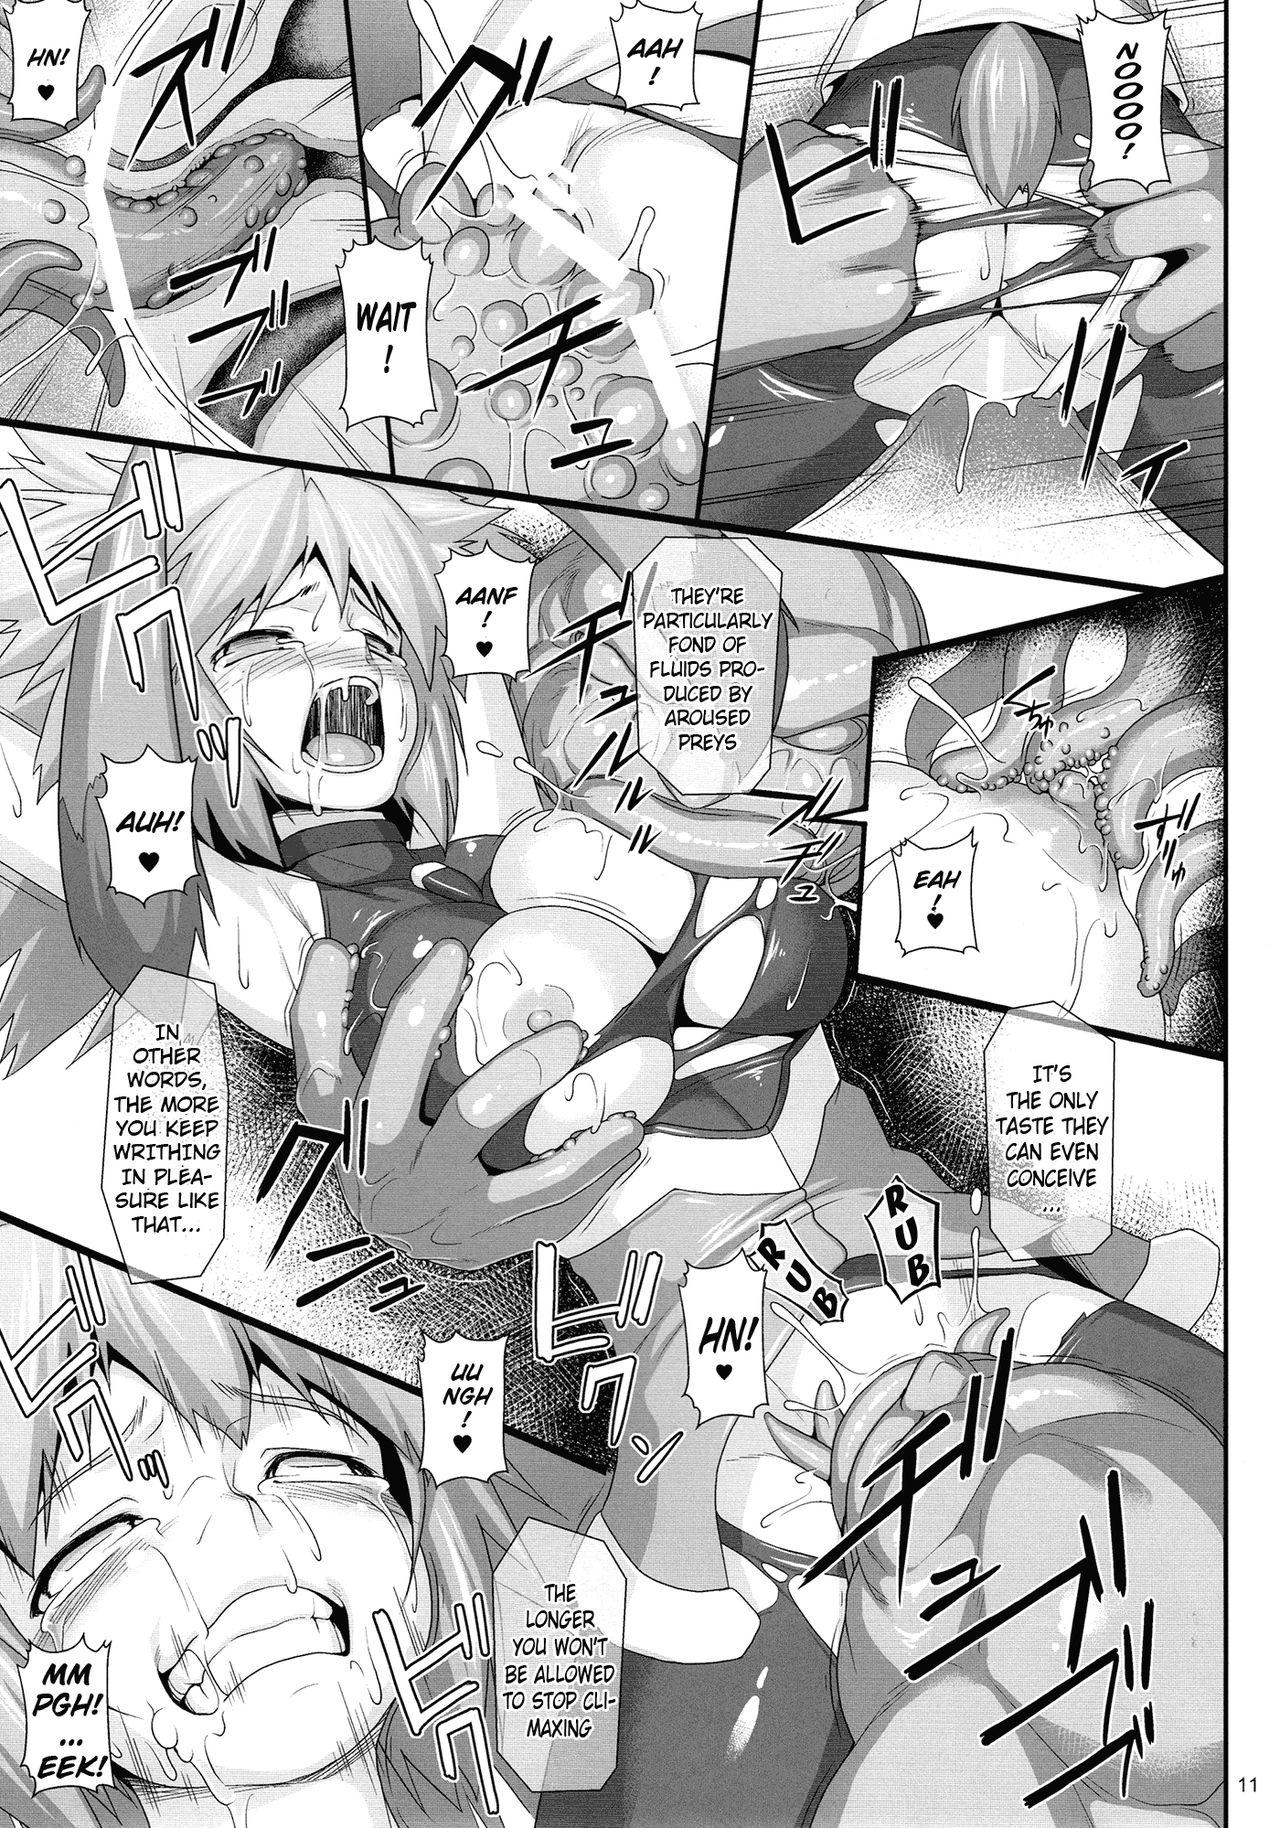 Bangbros Seraphic Gate 4 - Xenogears Hogtied - Page 10